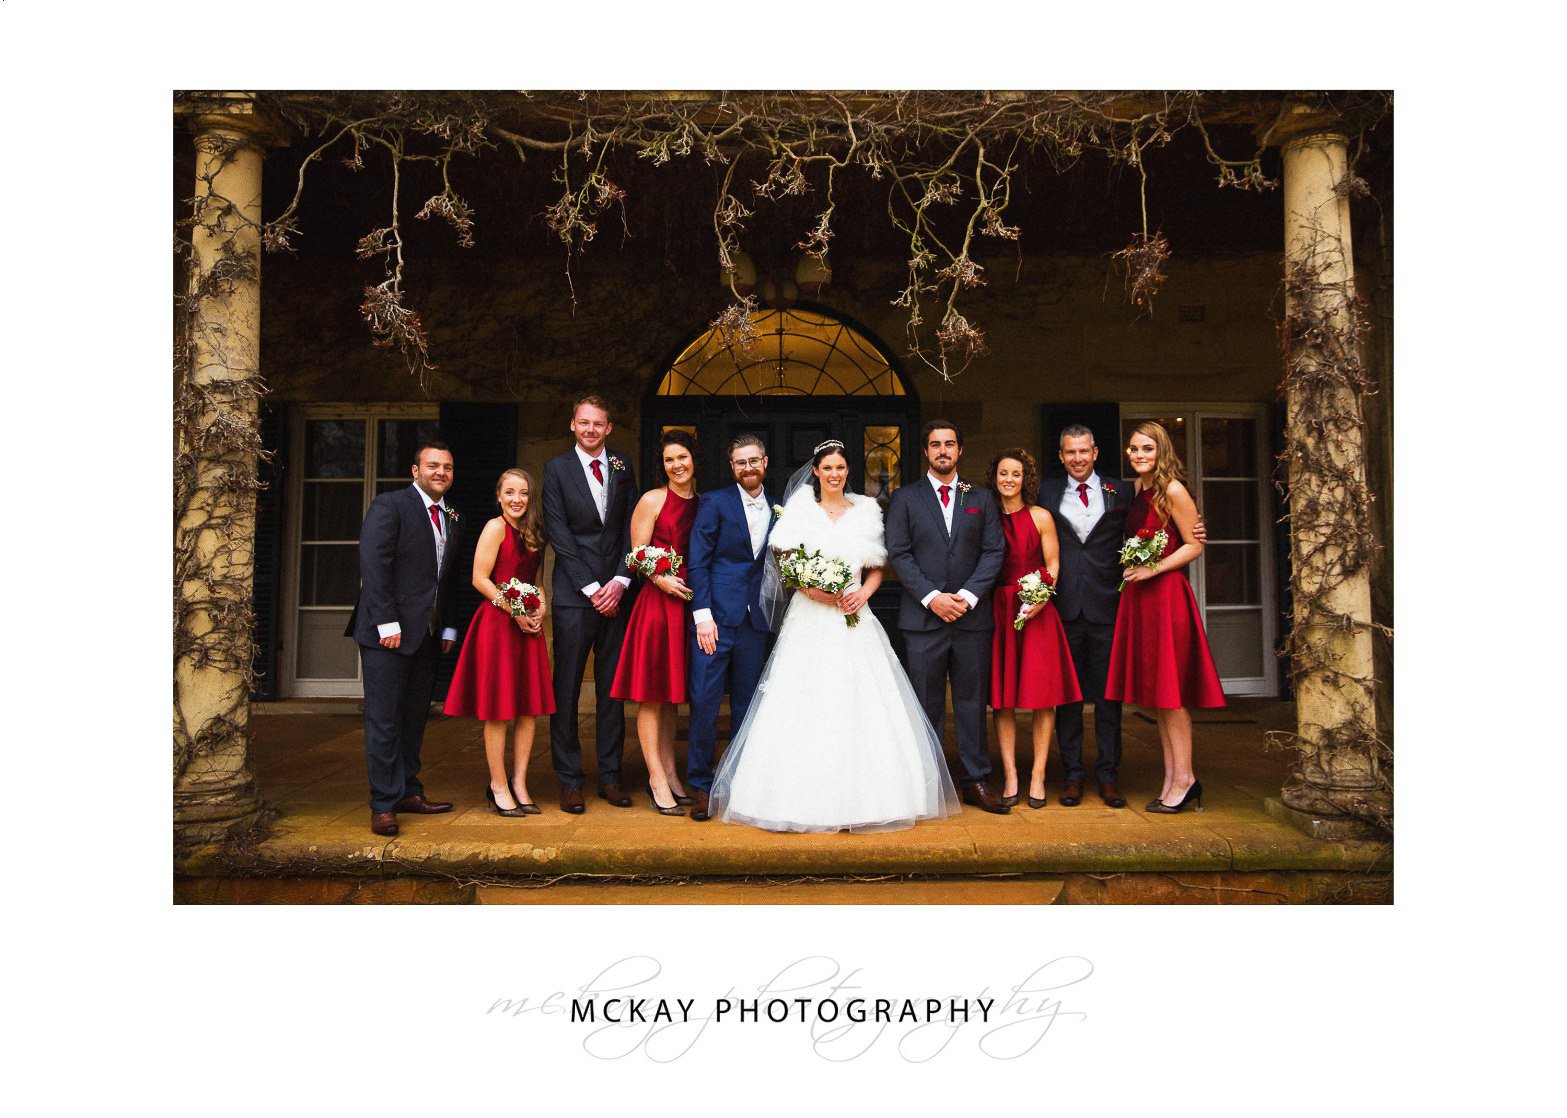 Bridal party photo at the old Bendooley Homestead